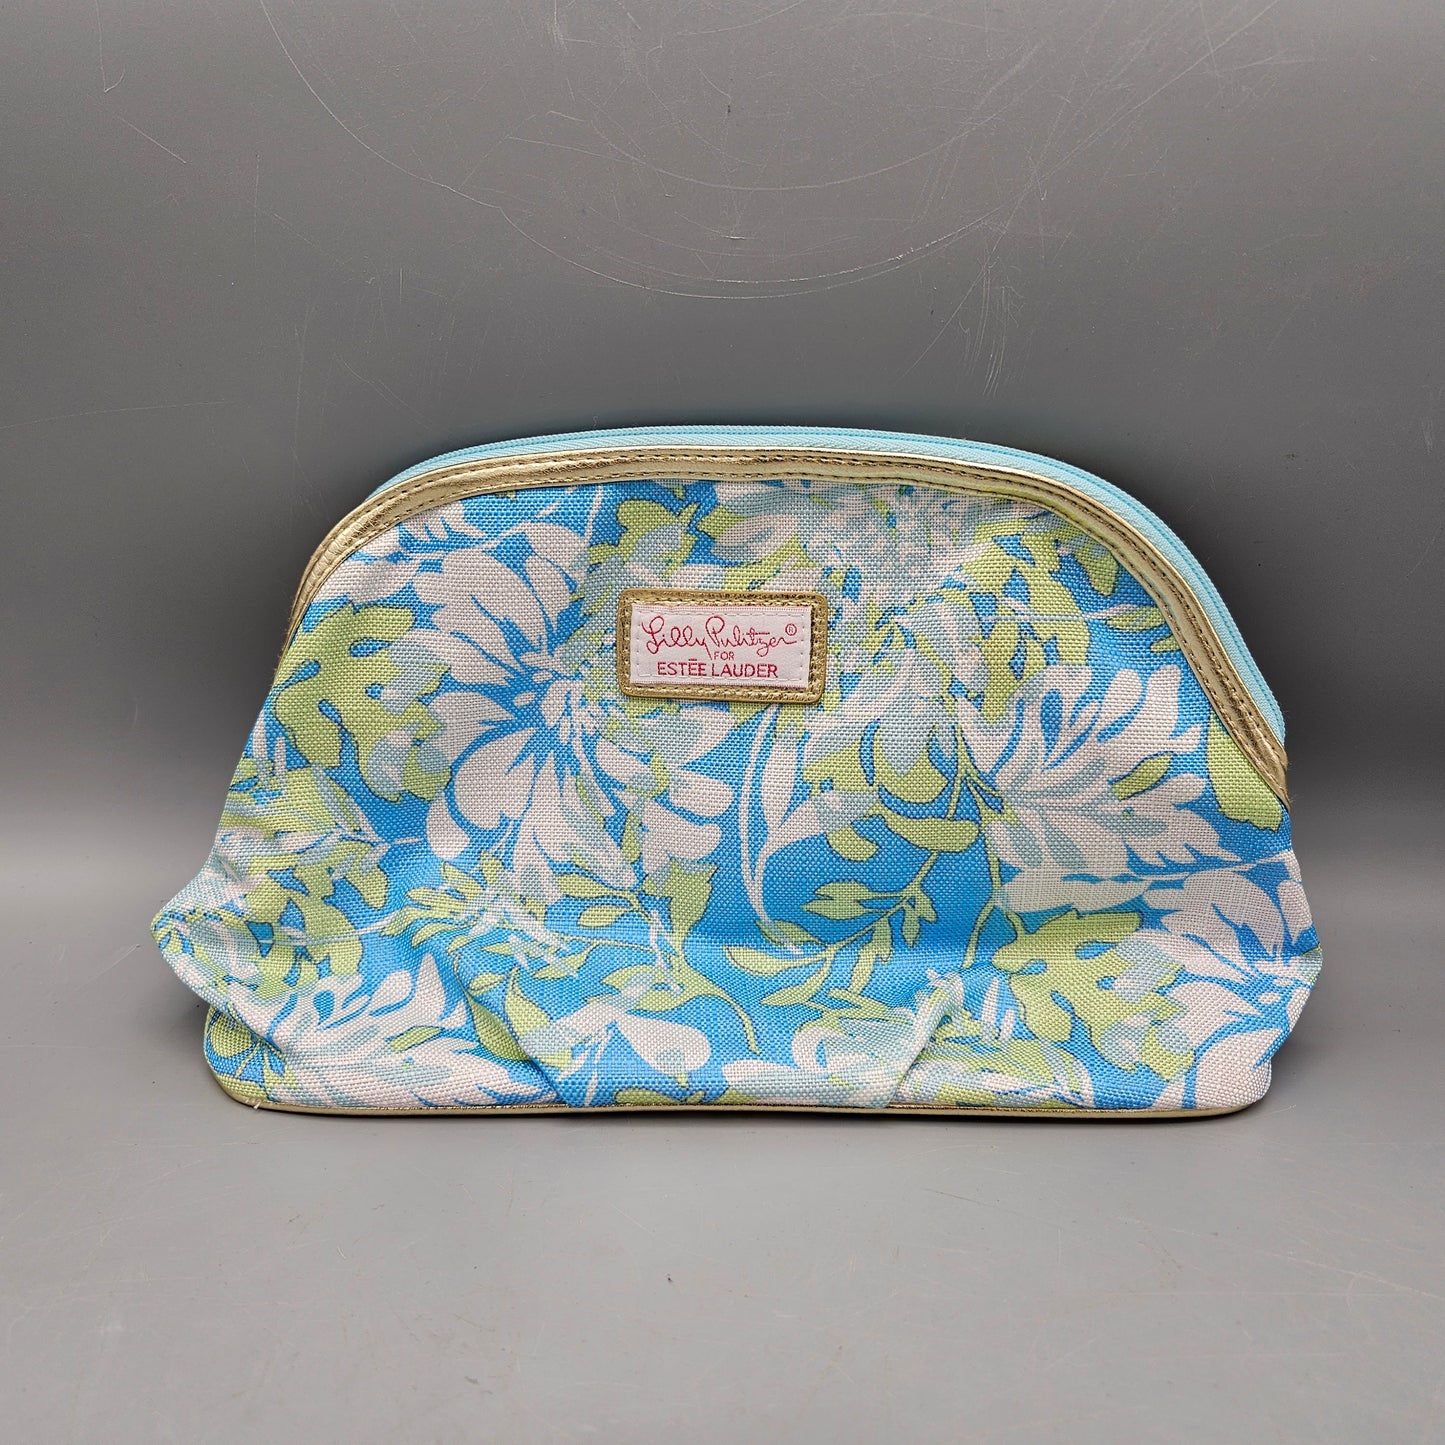 Estee Lauder Cosmetic Floral Bag | Lilly pulitzer bags, Purses and bags,  Cosmetic bag